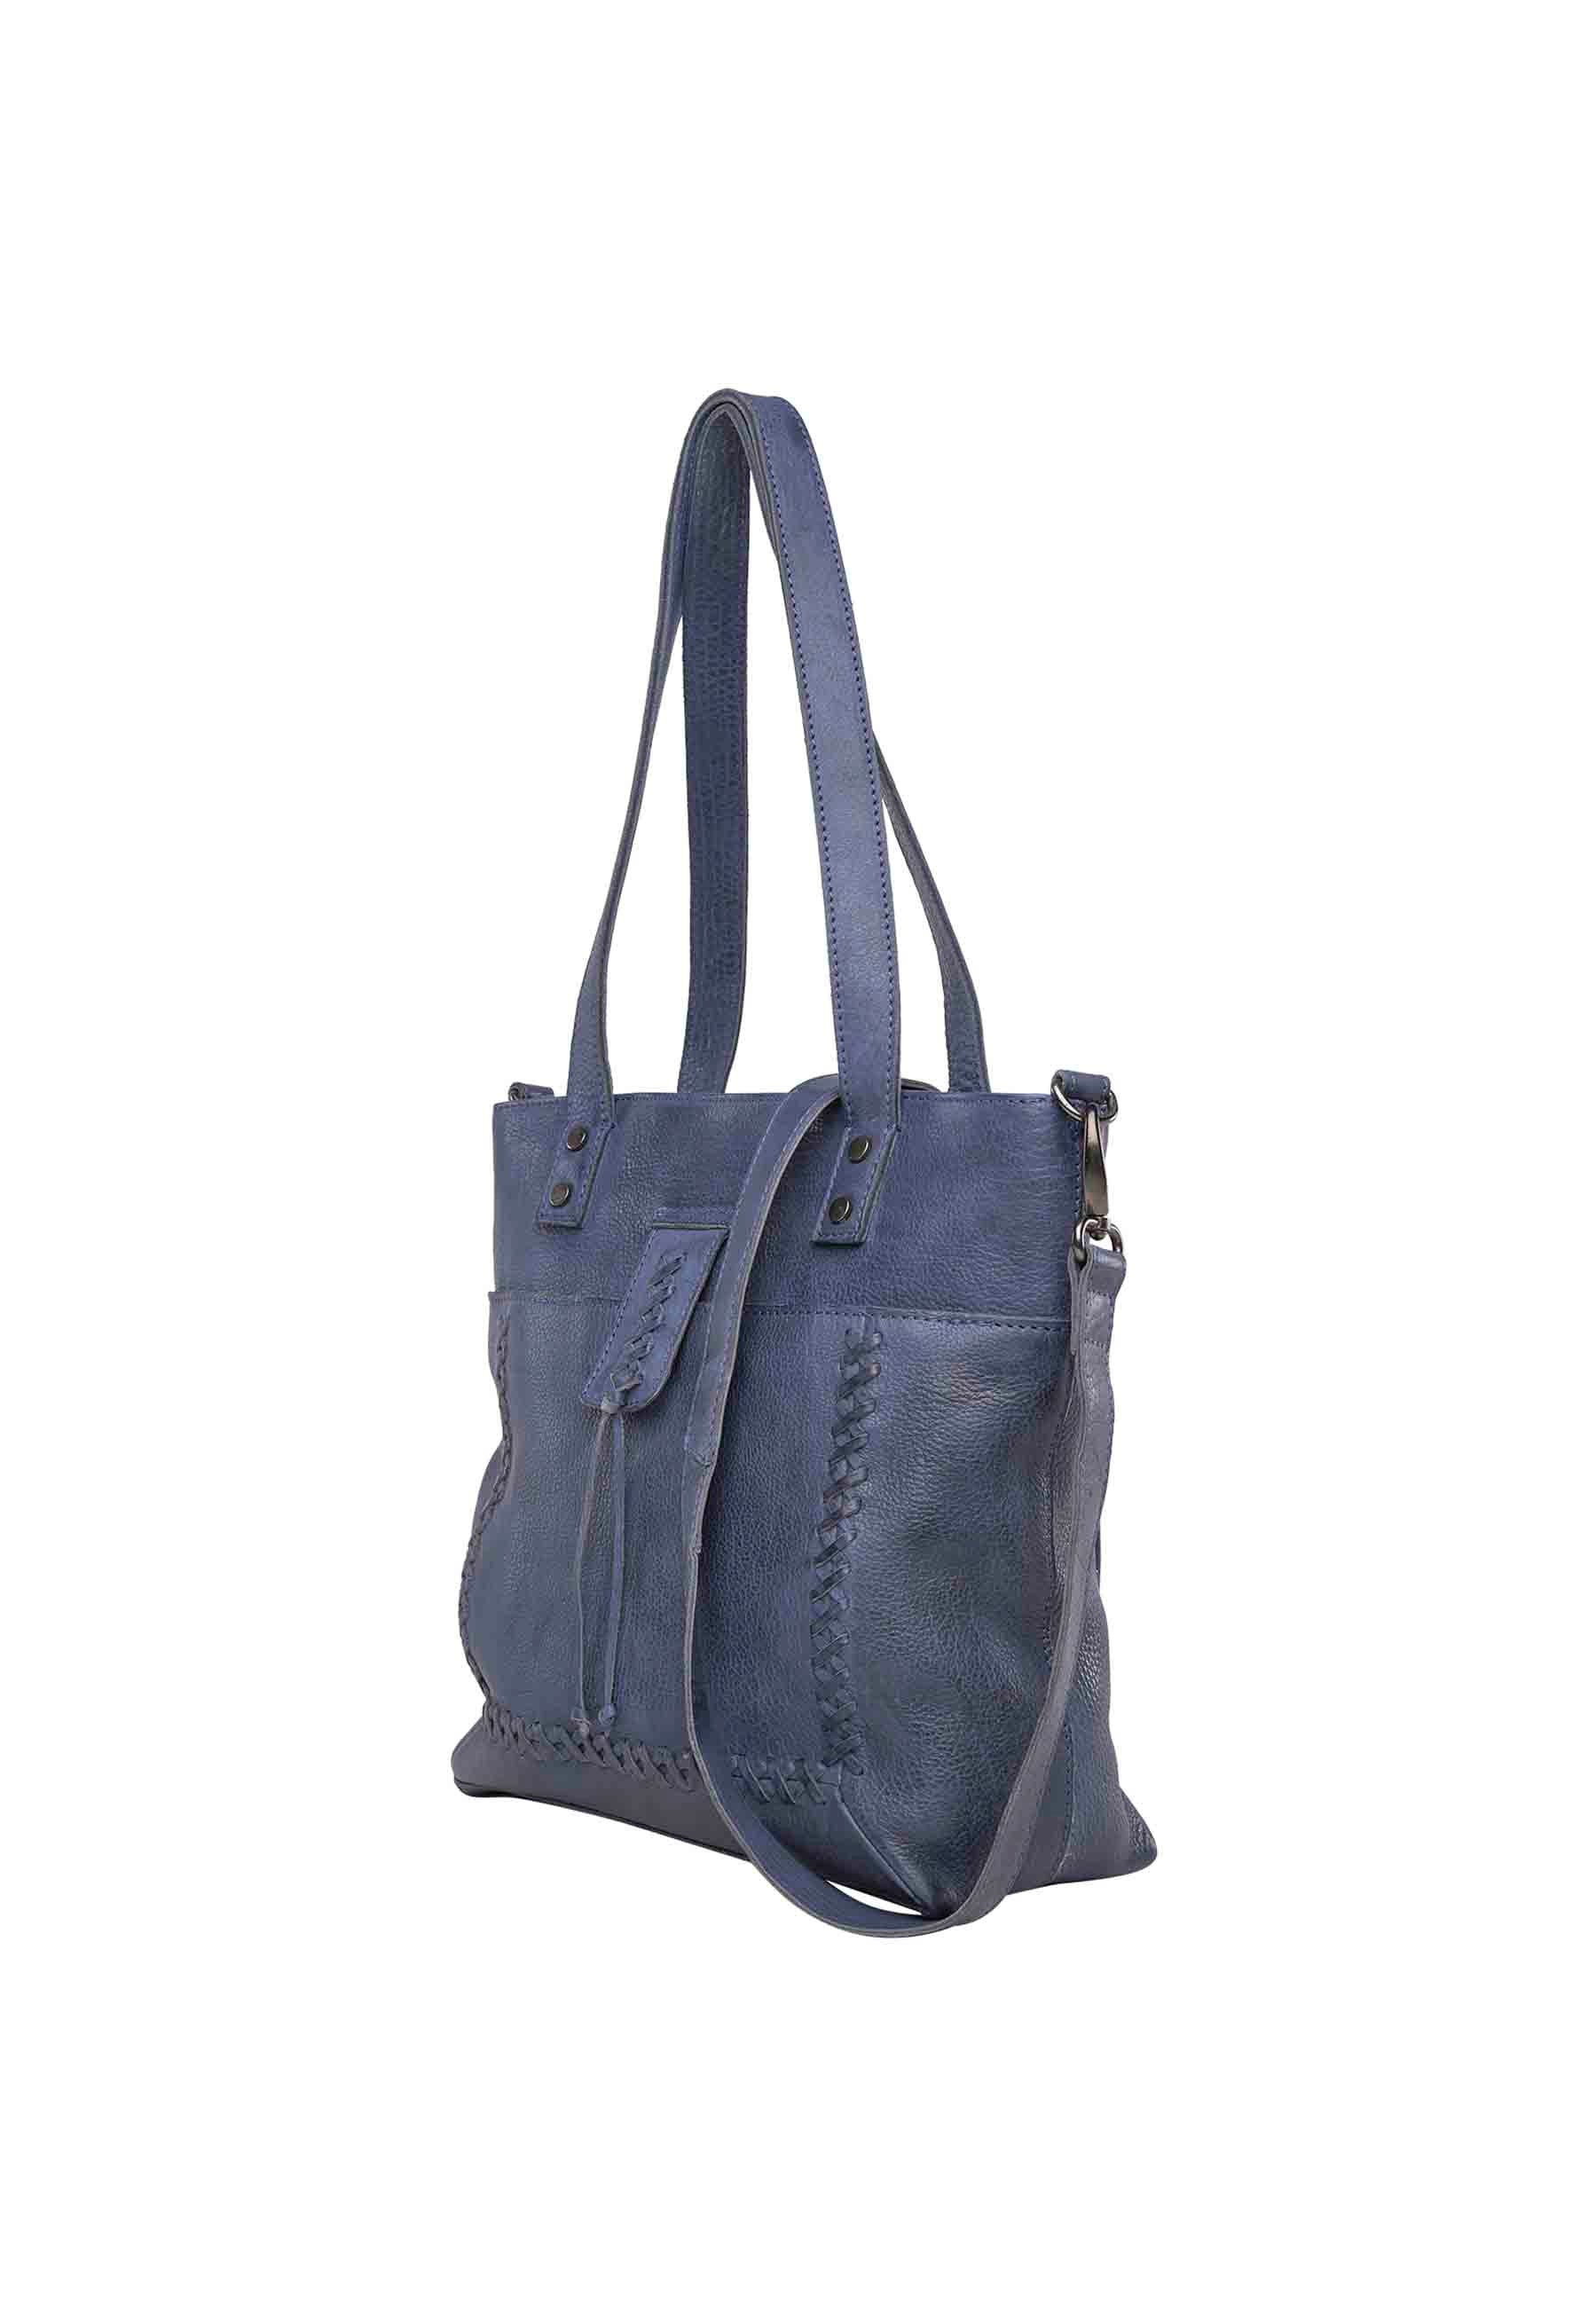 angle view of conceal carry bag in blue leather